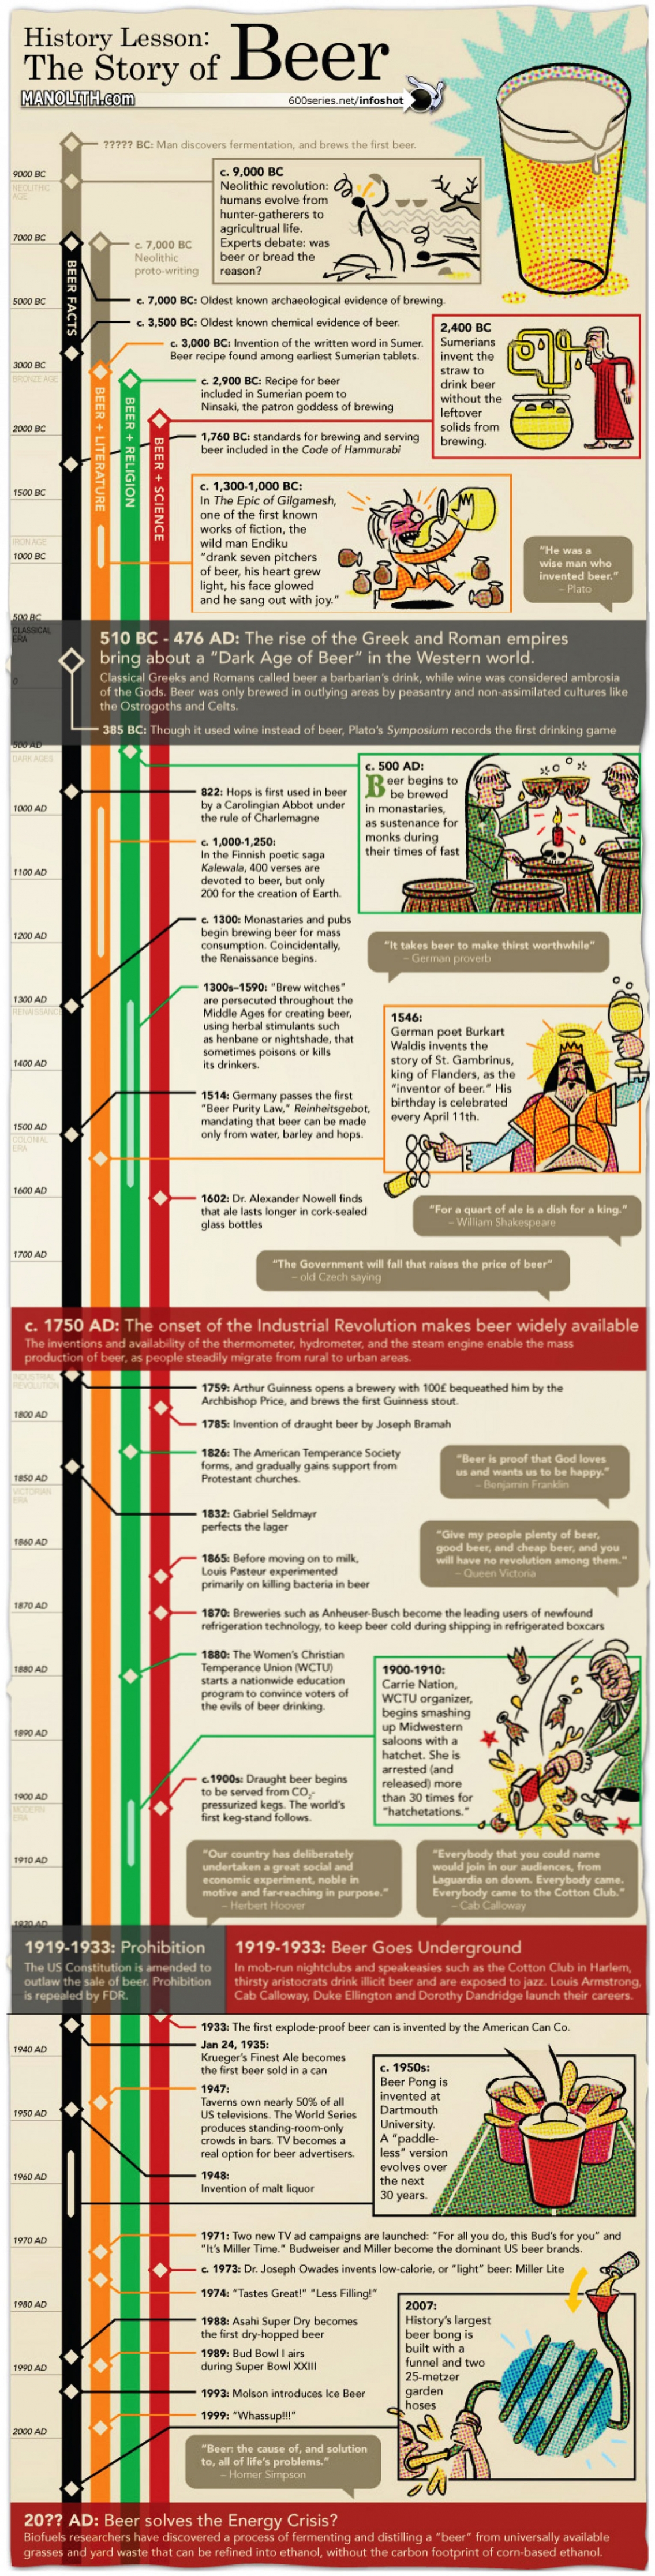 History Lesson The Story of Beer Infographic